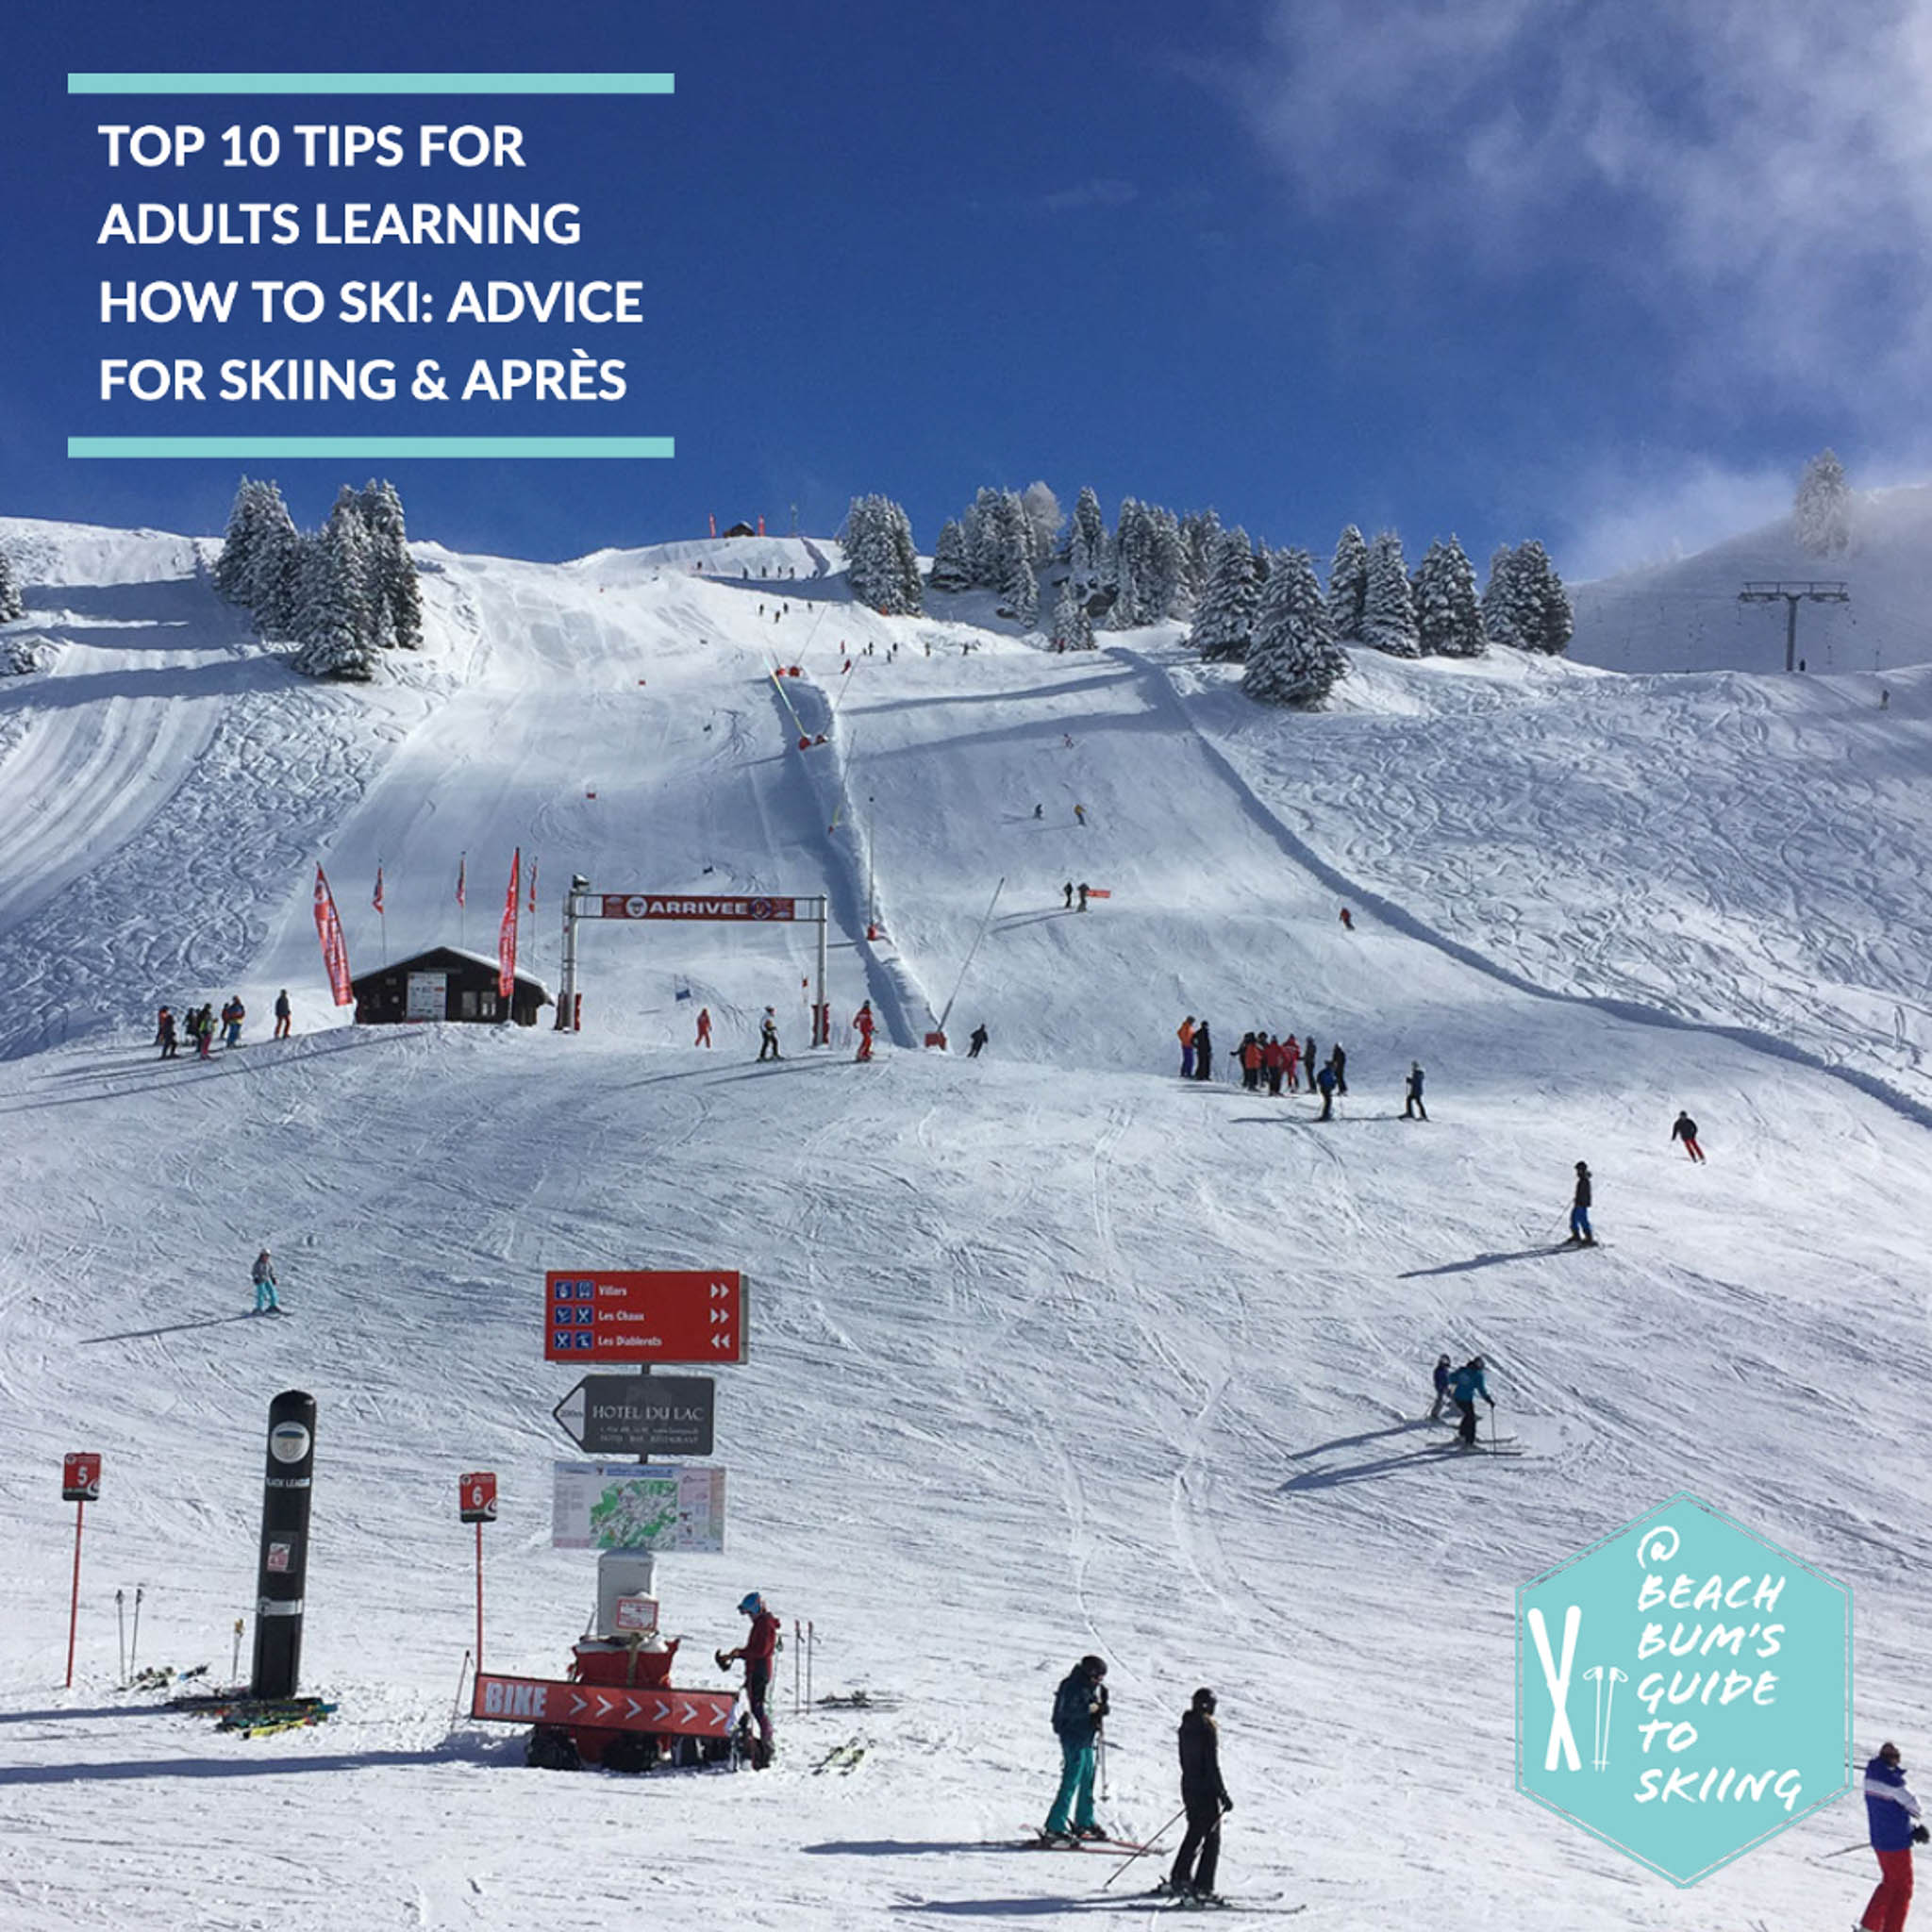 Top 10 tips for adults learning how to ski: Advice for skiing & après